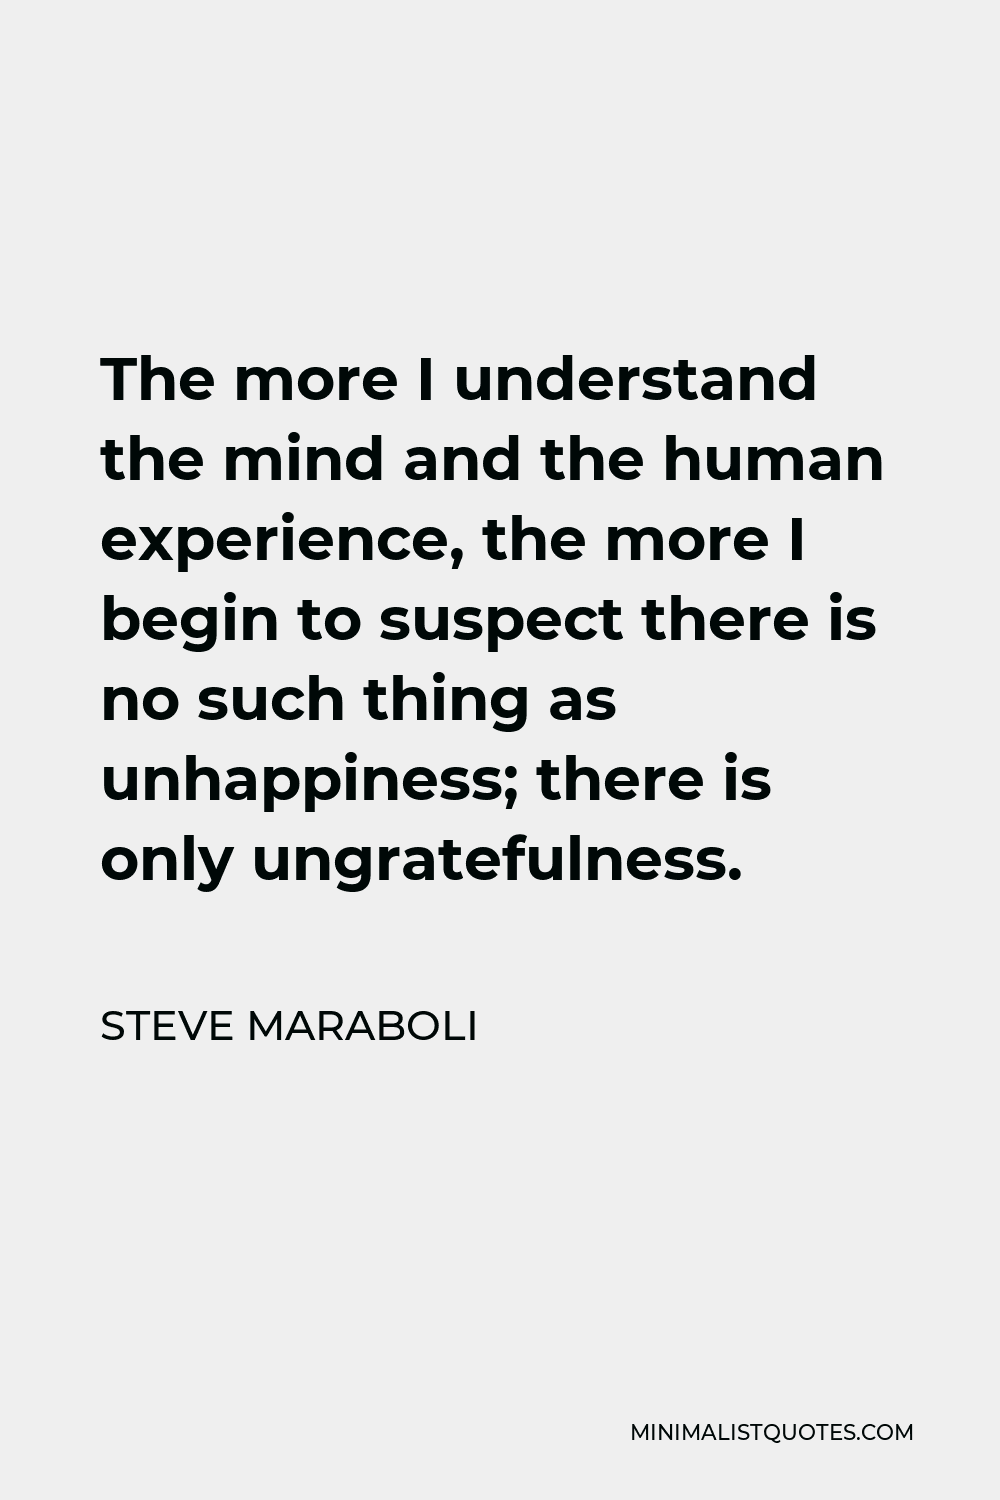 Steve Maraboli Quote - The more I understand the mind and the human experience, the more I begin to suspect there is no such thing as unhappiness; there is only ungratefulness.